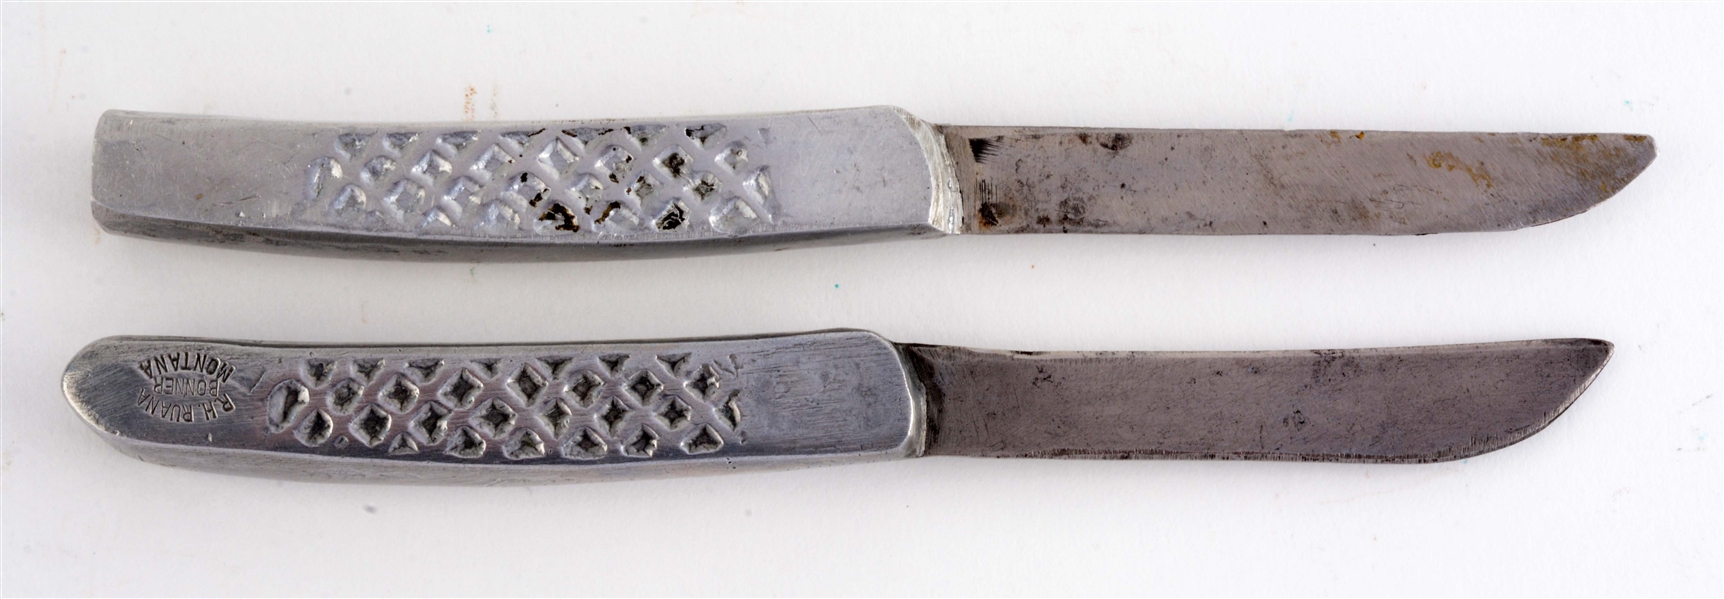 R.H. RUANA ALUMINUM PAIRING KNIVES WITH LETTER. 